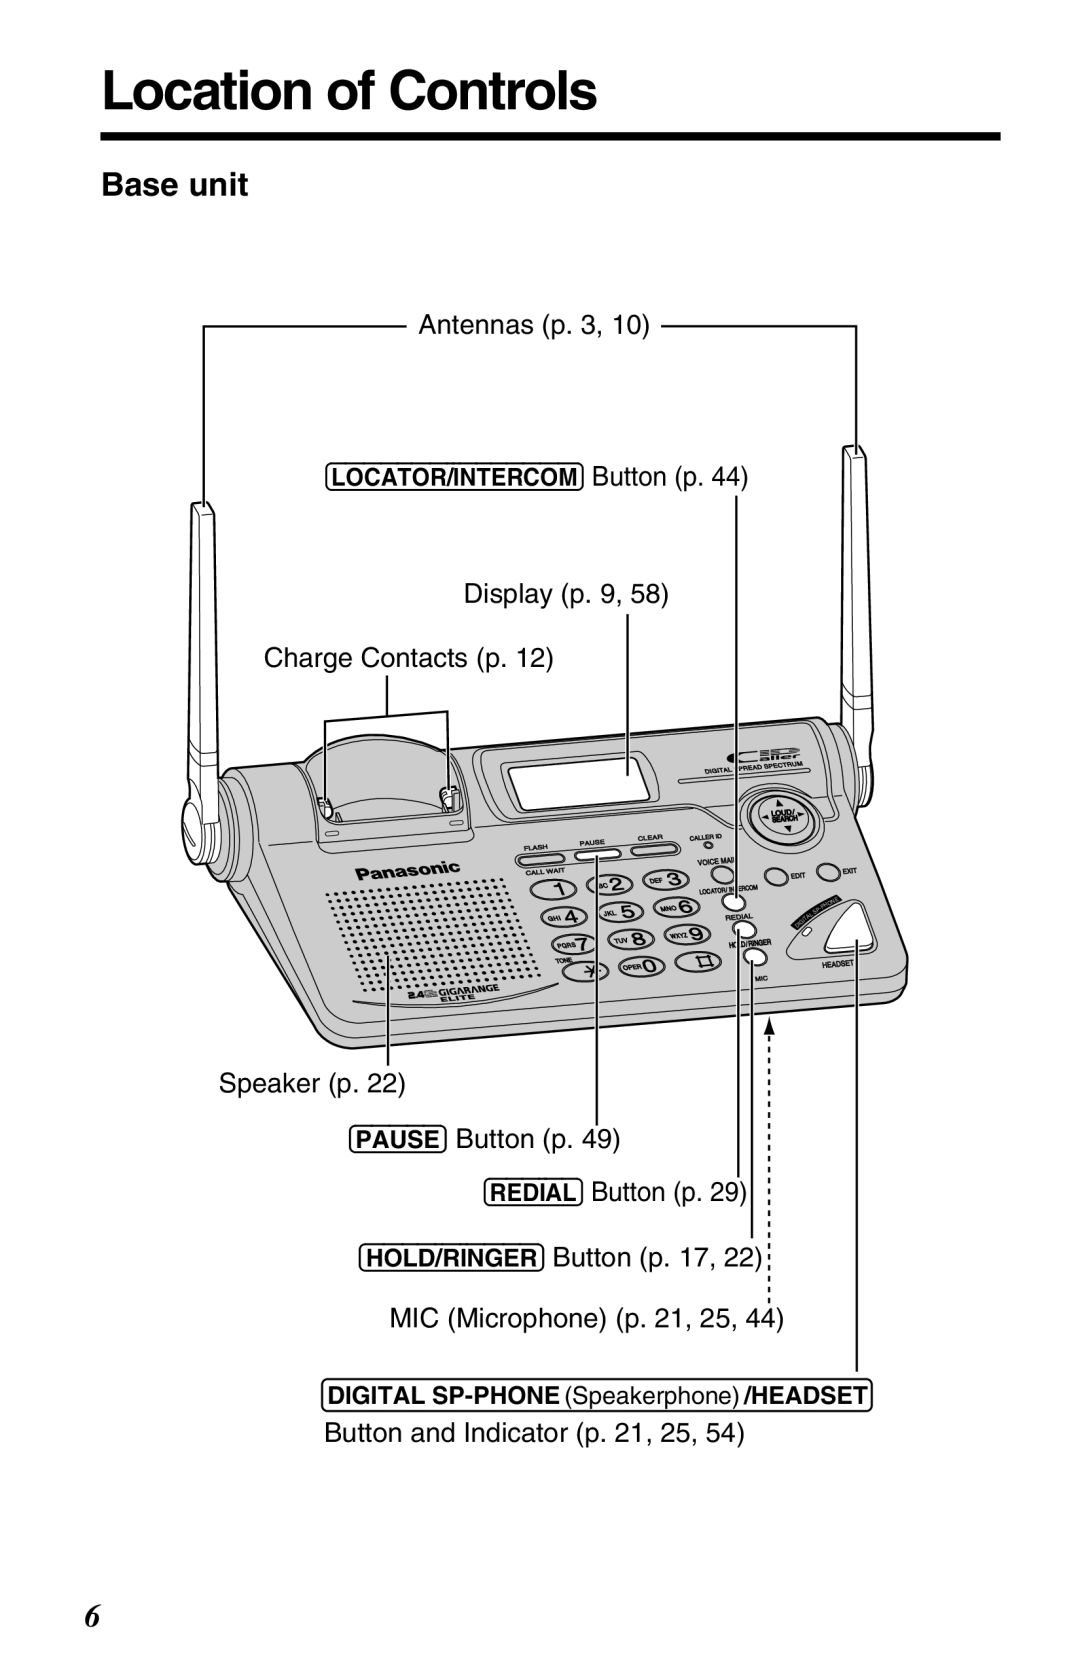 Panasonic KX-TG2650N Location of Controls, Base unit, Antennas p, Display p Charge Contacts p, Button and Indicator p , 25 